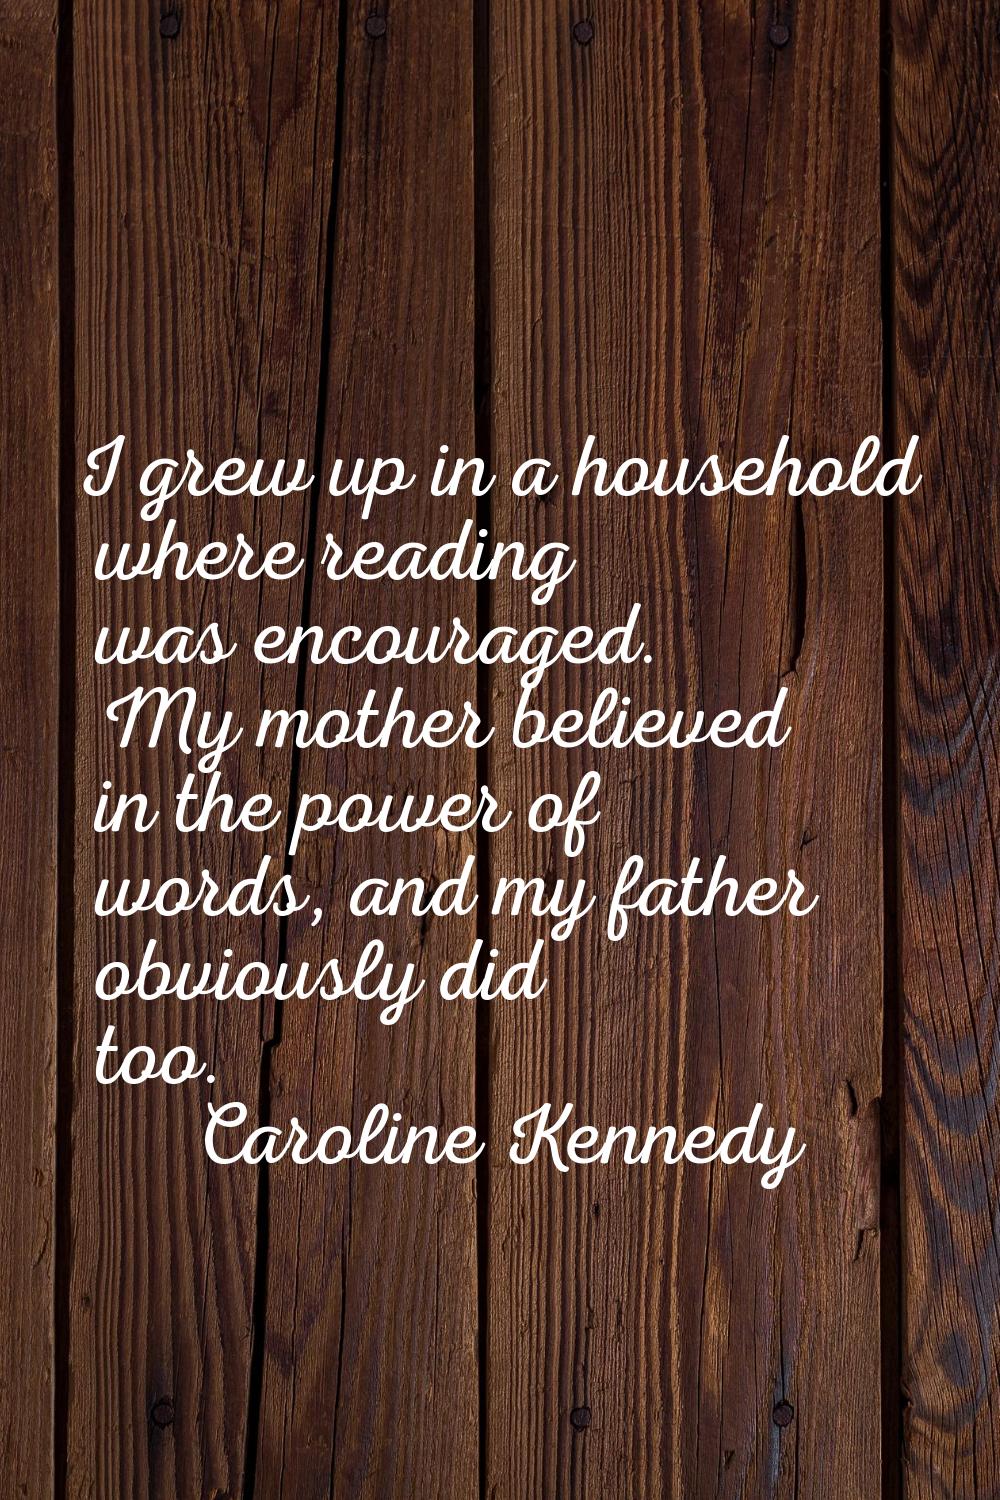 I grew up in a household where reading was encouraged. My mother believed in the power of words, an